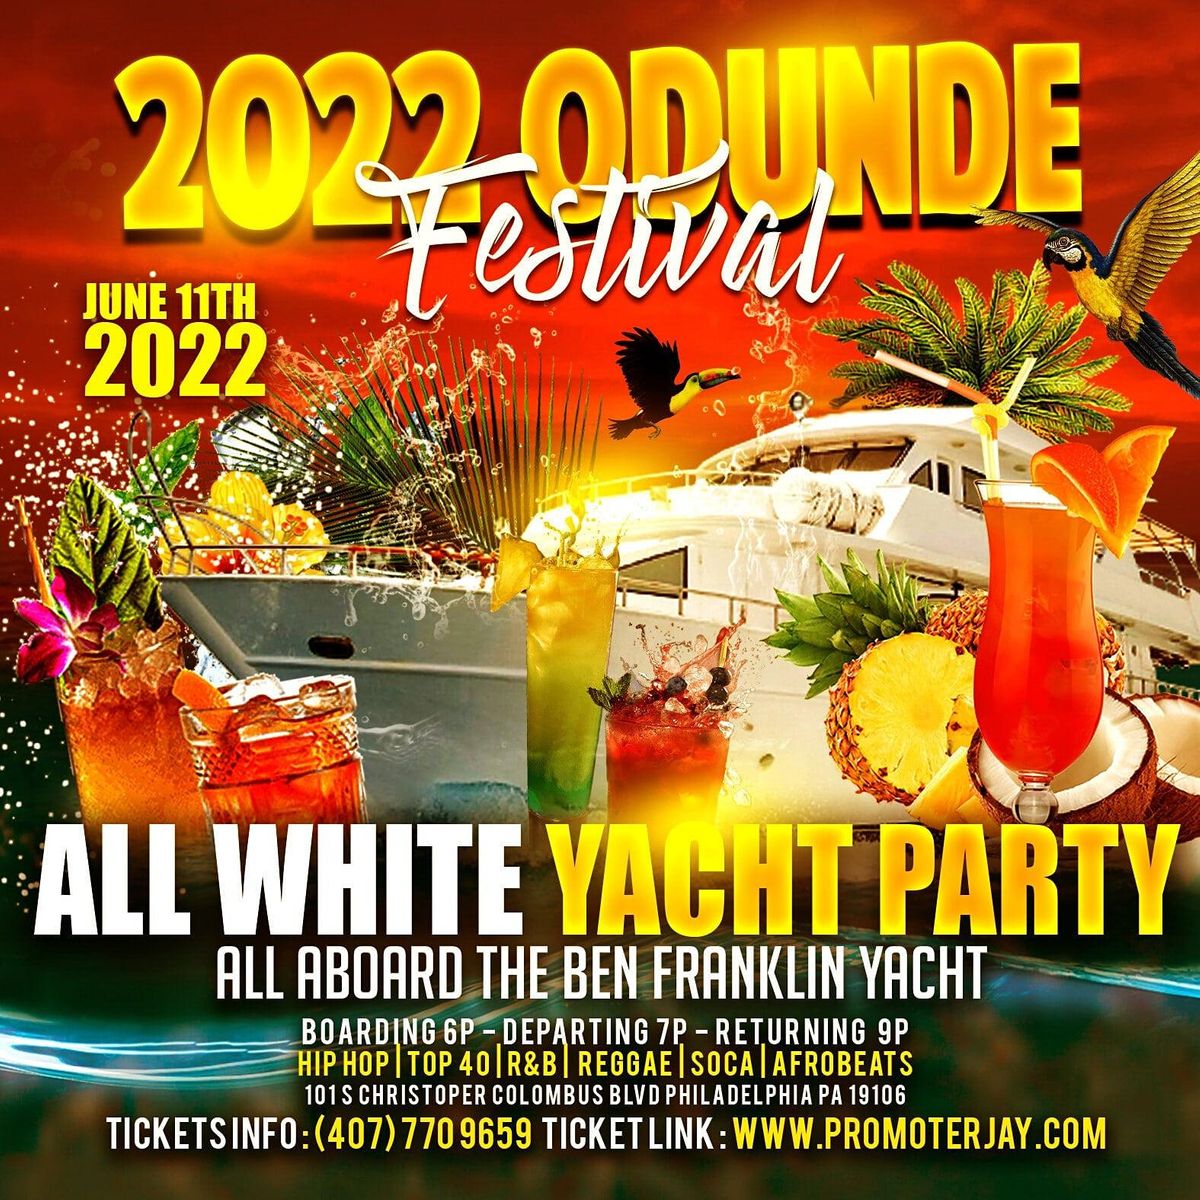 2022 Odunde Festival All White Yacht Party, 101 S Christopher Columbus